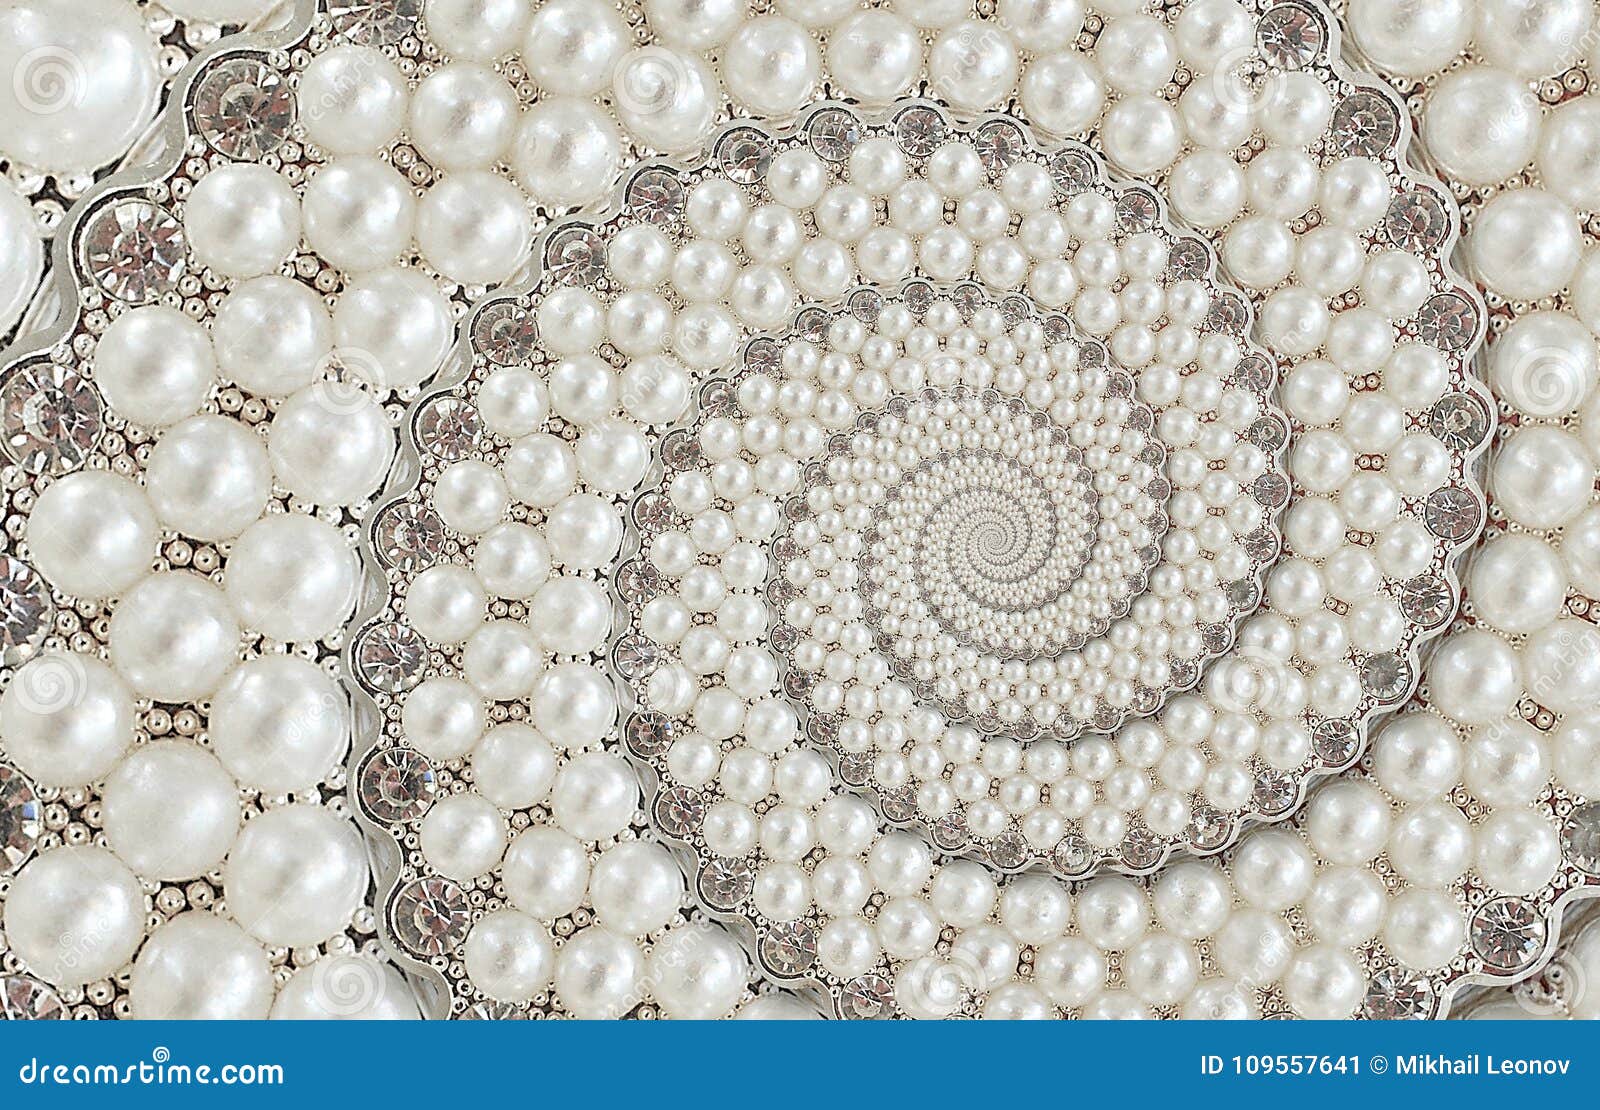 pearls and diamonds jewels abstract spiral background pattern fractal. pearls background, repetitive pattern. abstract pearl backg